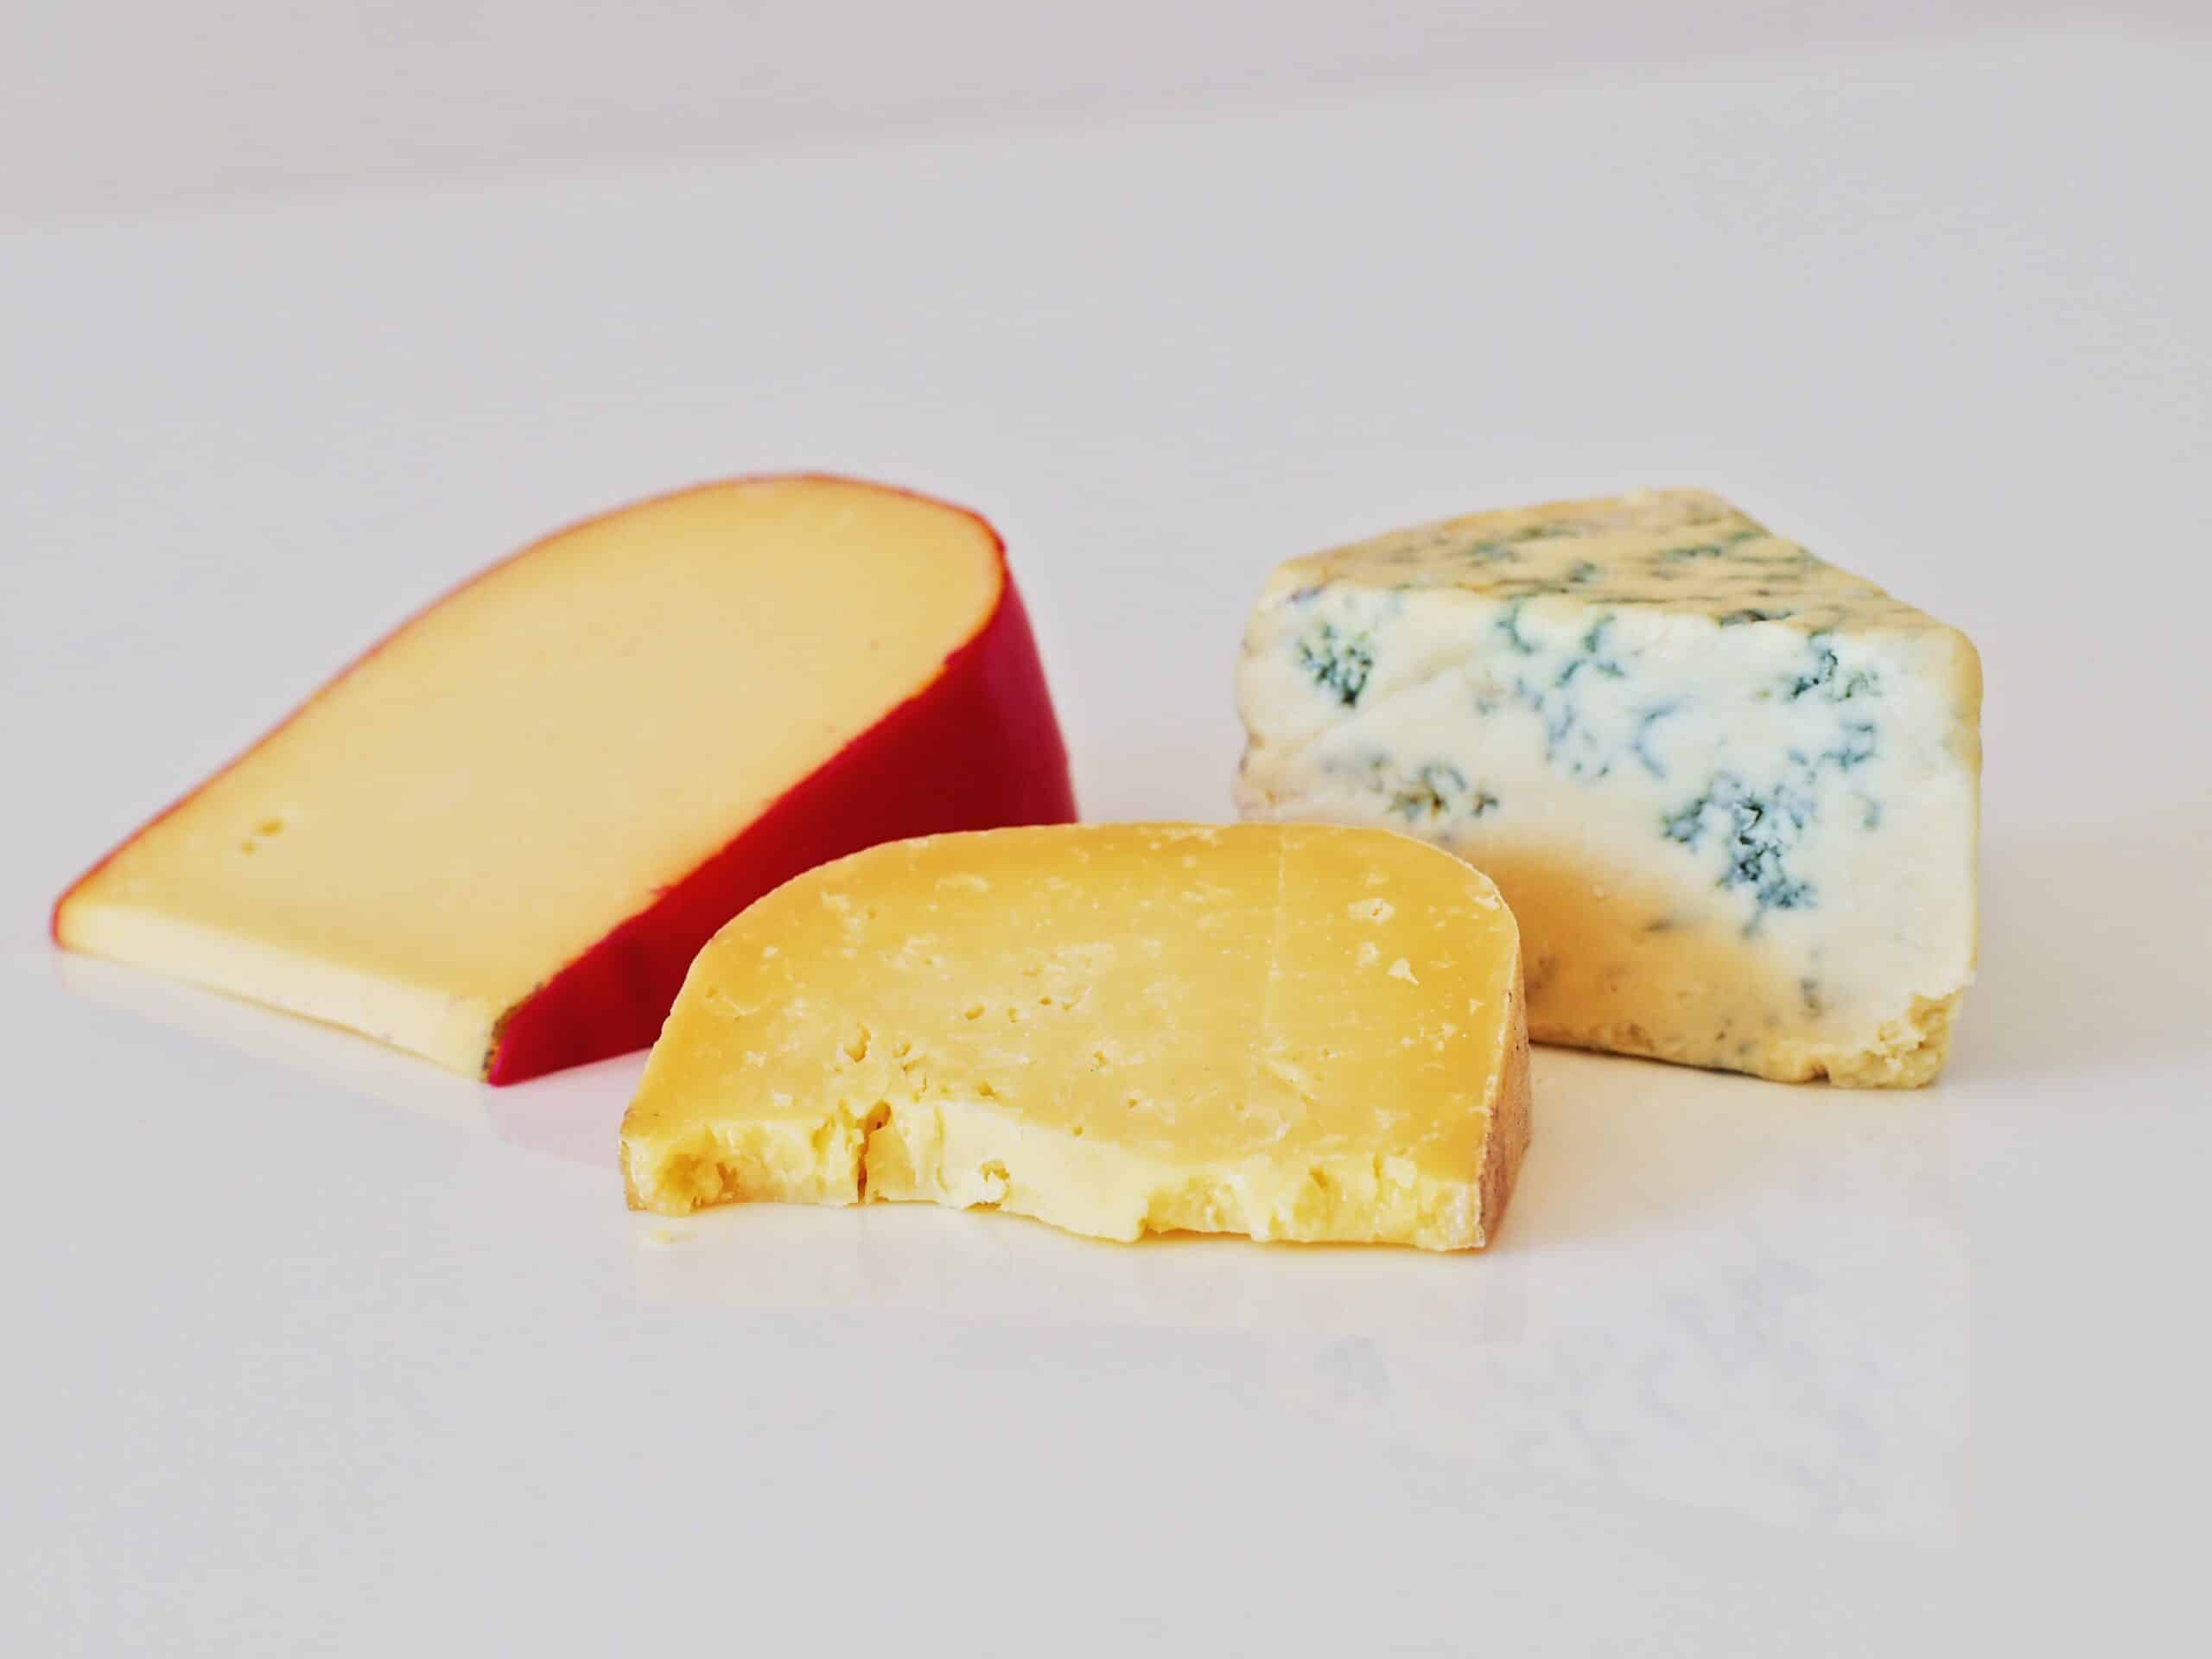 Yellow Cheese vs. White Cheese: What's the Difference?